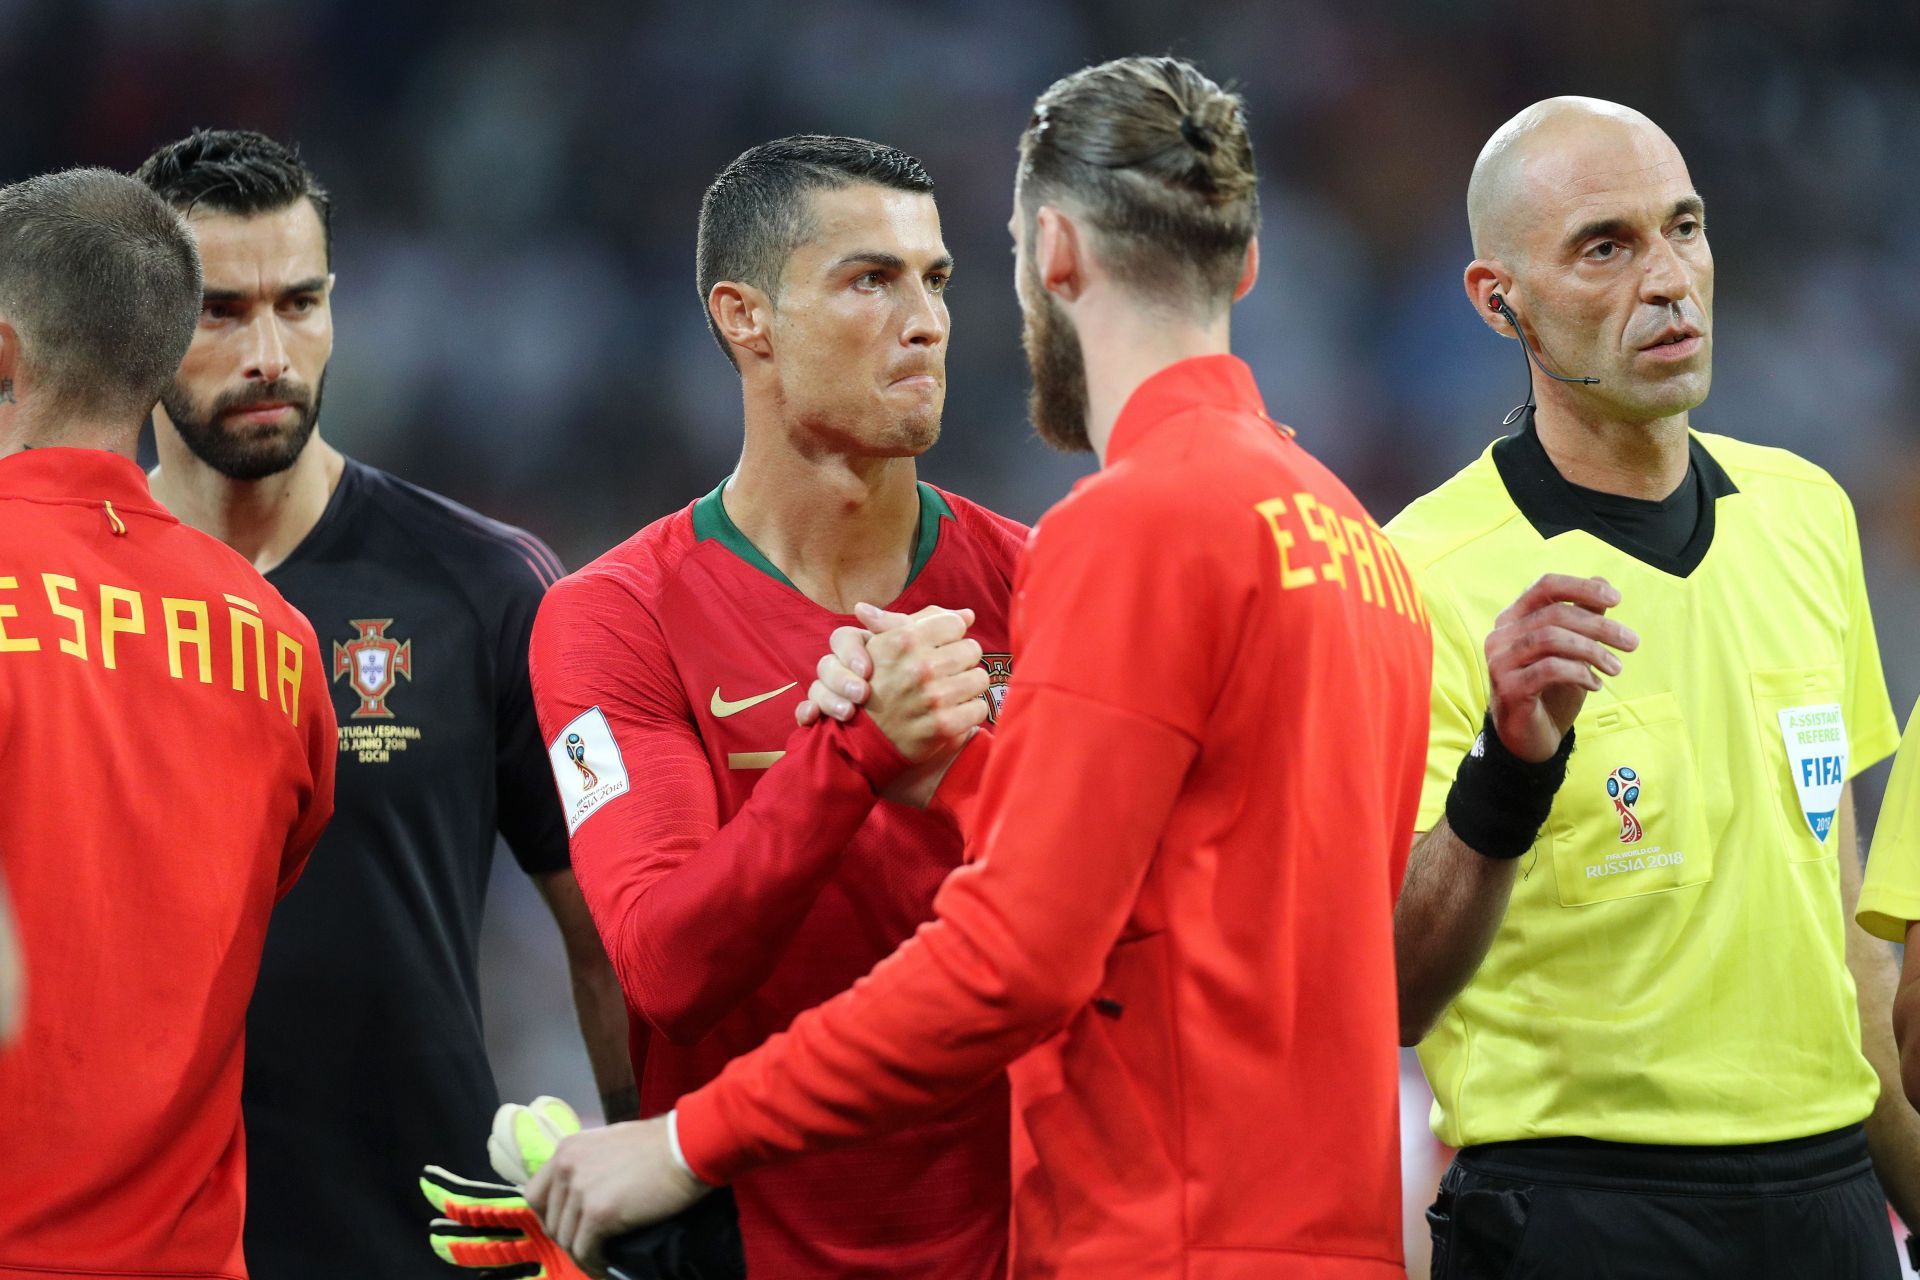 Ronaldo and De Gea could be teammates once again.